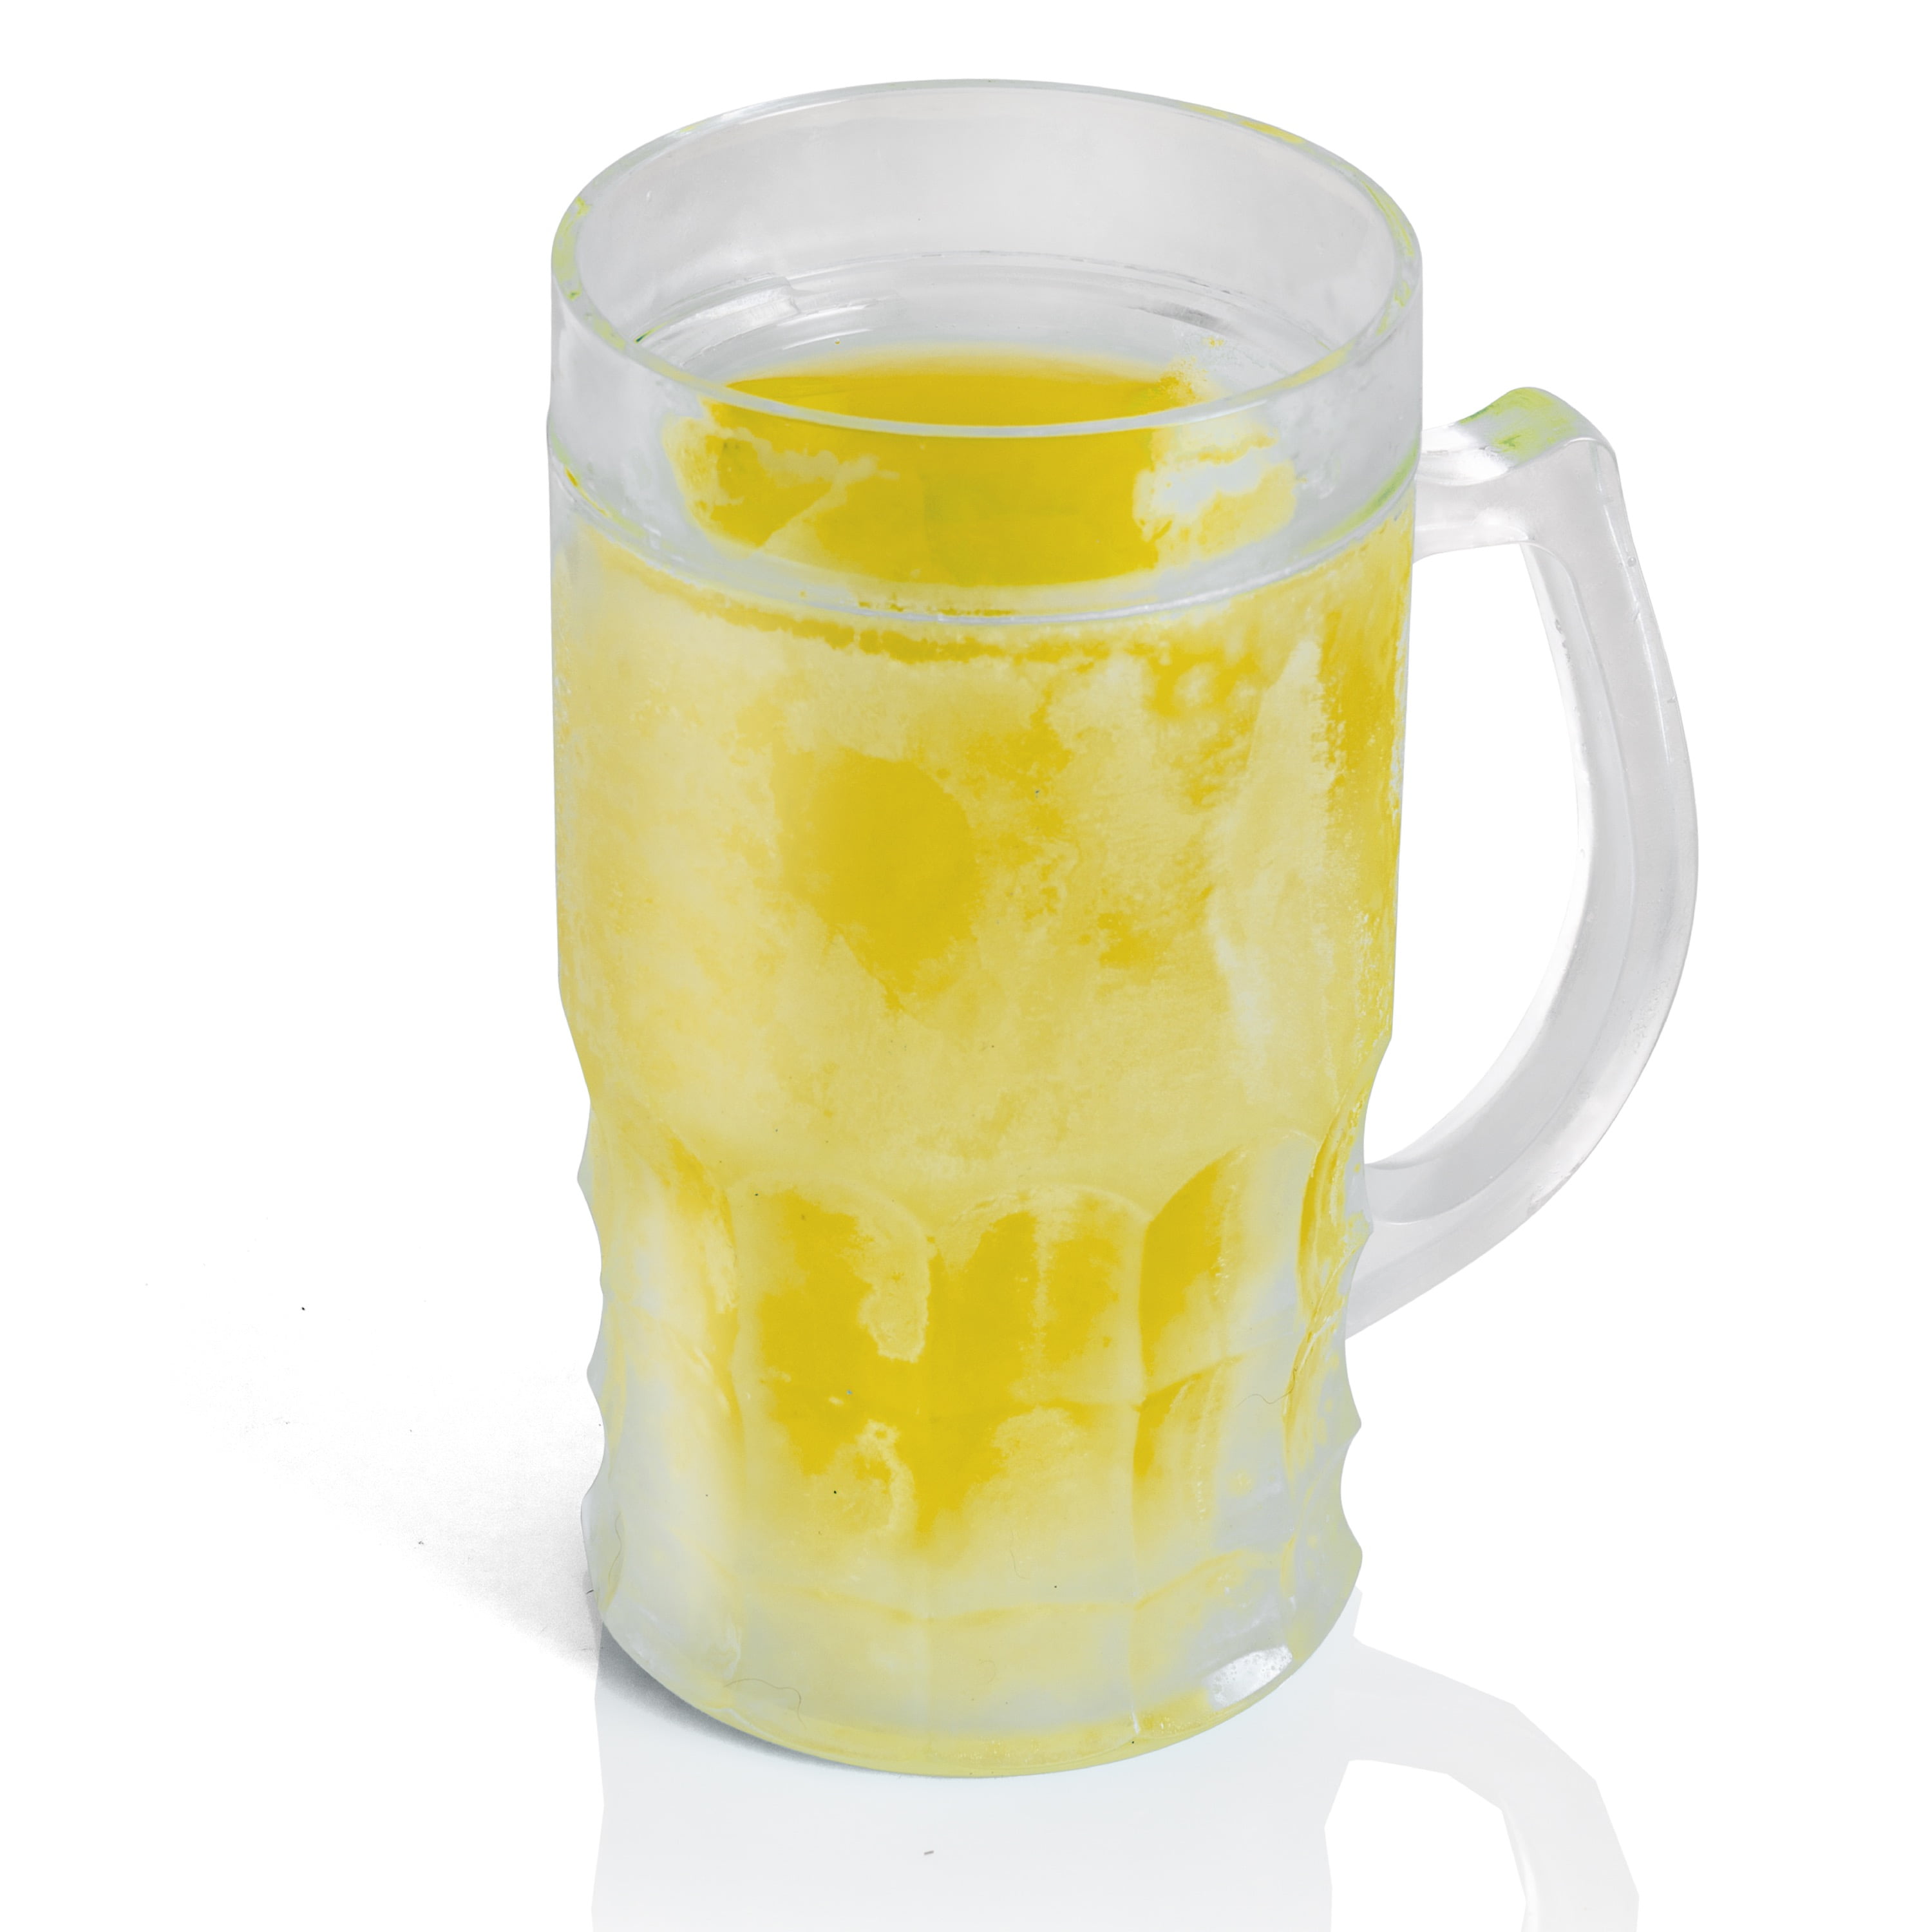 luxail Freezer Beer Mugs, Double Wall, Insulated Gel Plastic Pint Freezable  Glasses, 15 oz, Clear 2 …See more luxail Freezer Beer Mugs, Double Wall